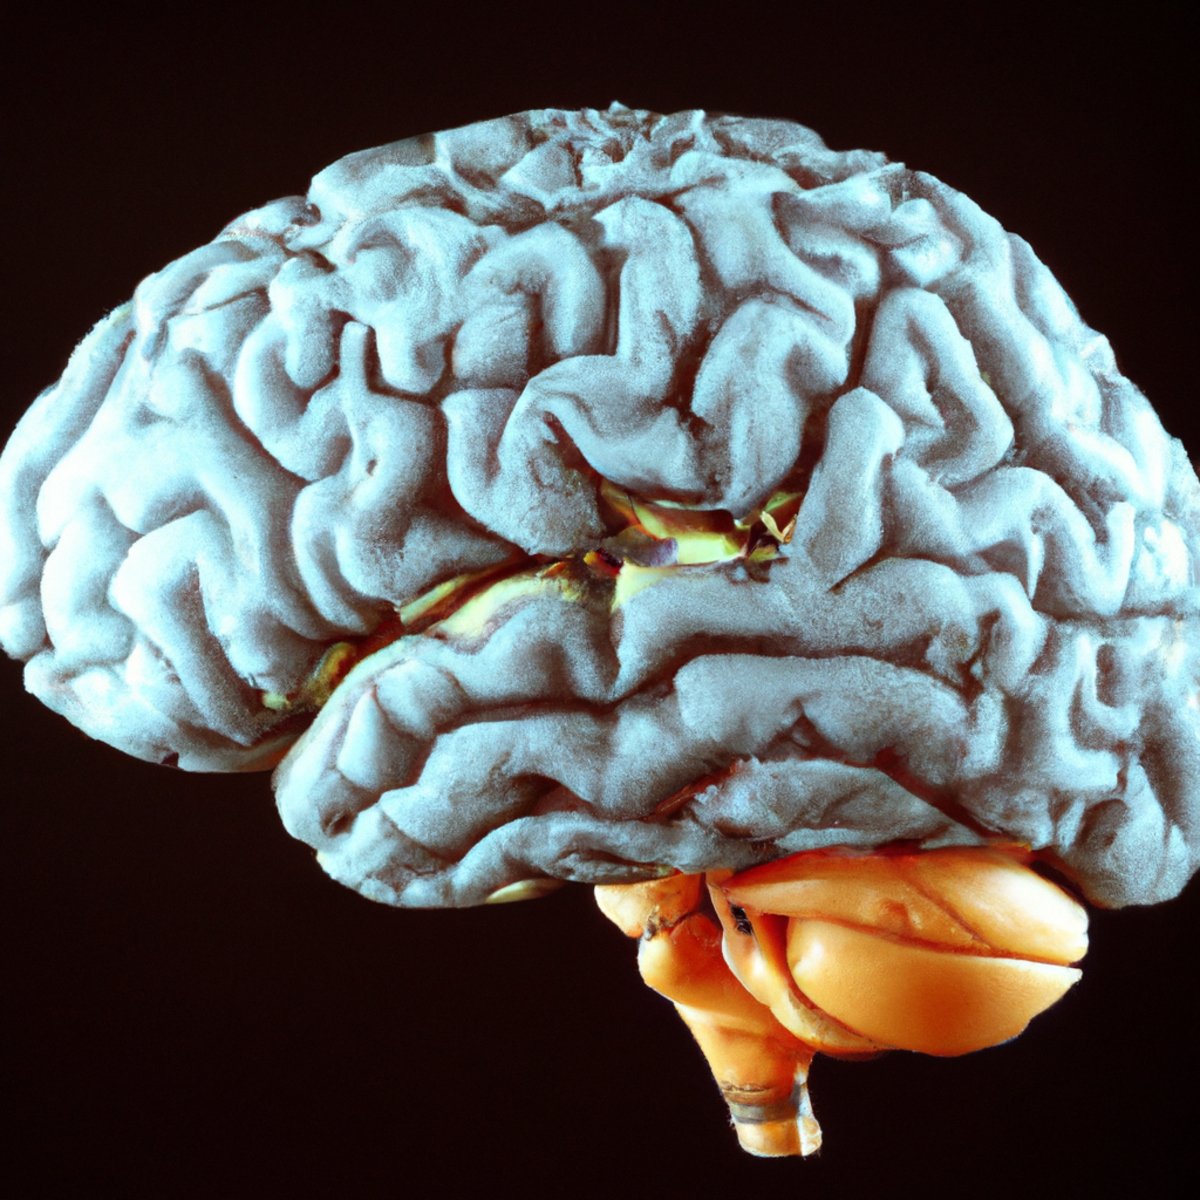 Close-up of lifelike brain model, highlighting intricate details and emphasizing complexity of Alexander Disease.